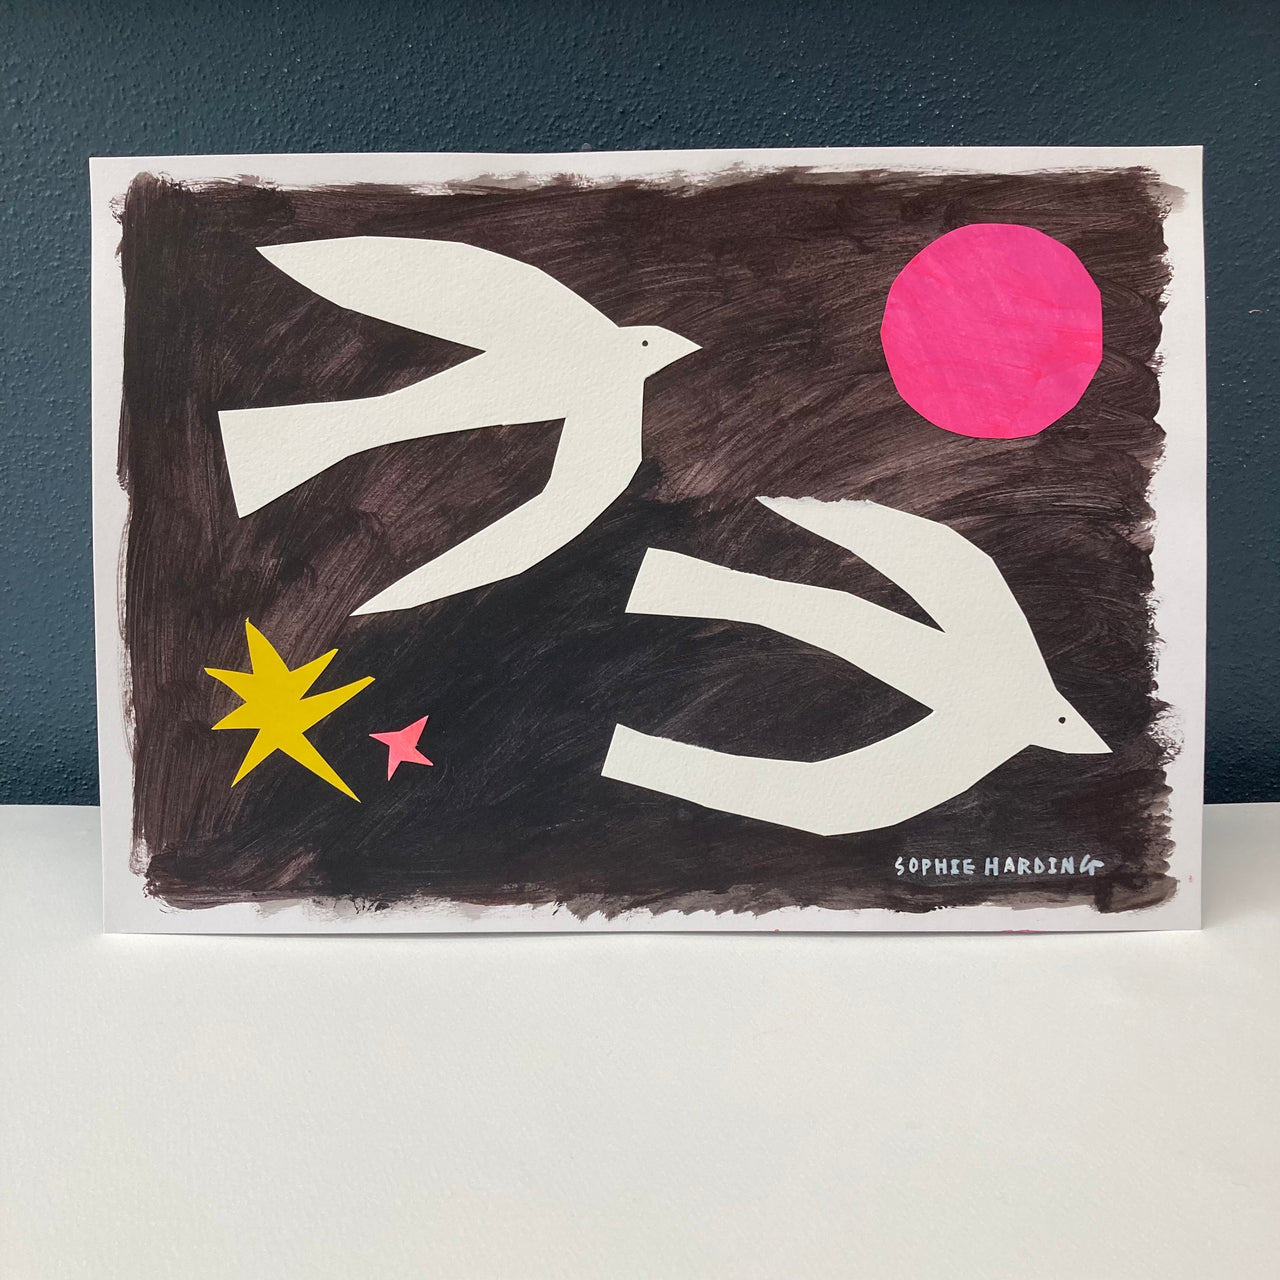 Two white birds on black background, pink moon with yellow and pink star by artist Sophie Harding.